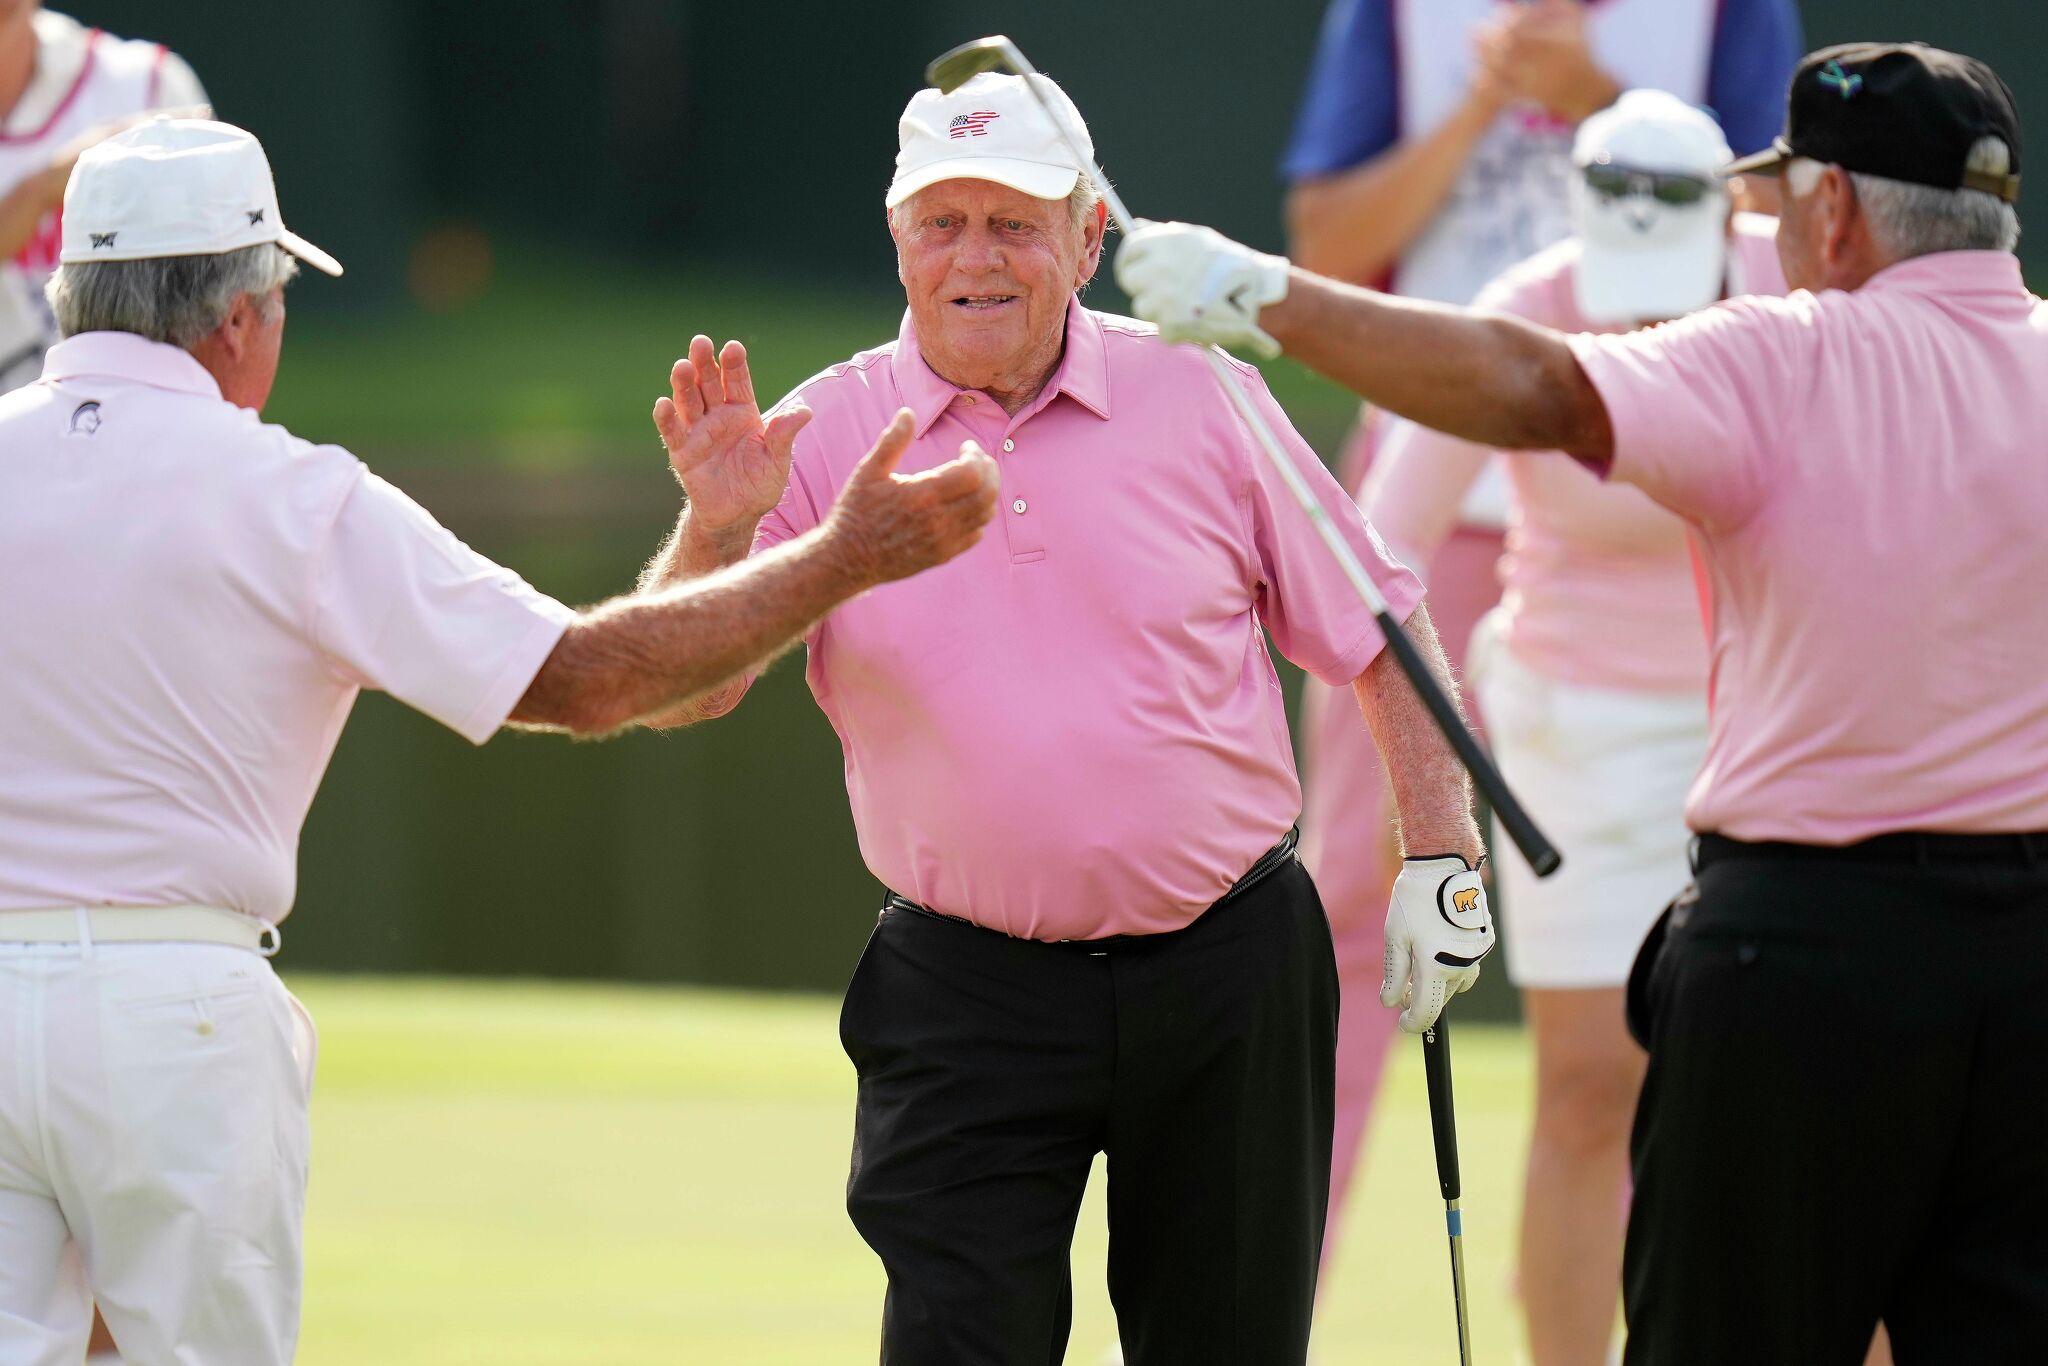 Greats of Golf returns to Insperity Invitational for 10th time